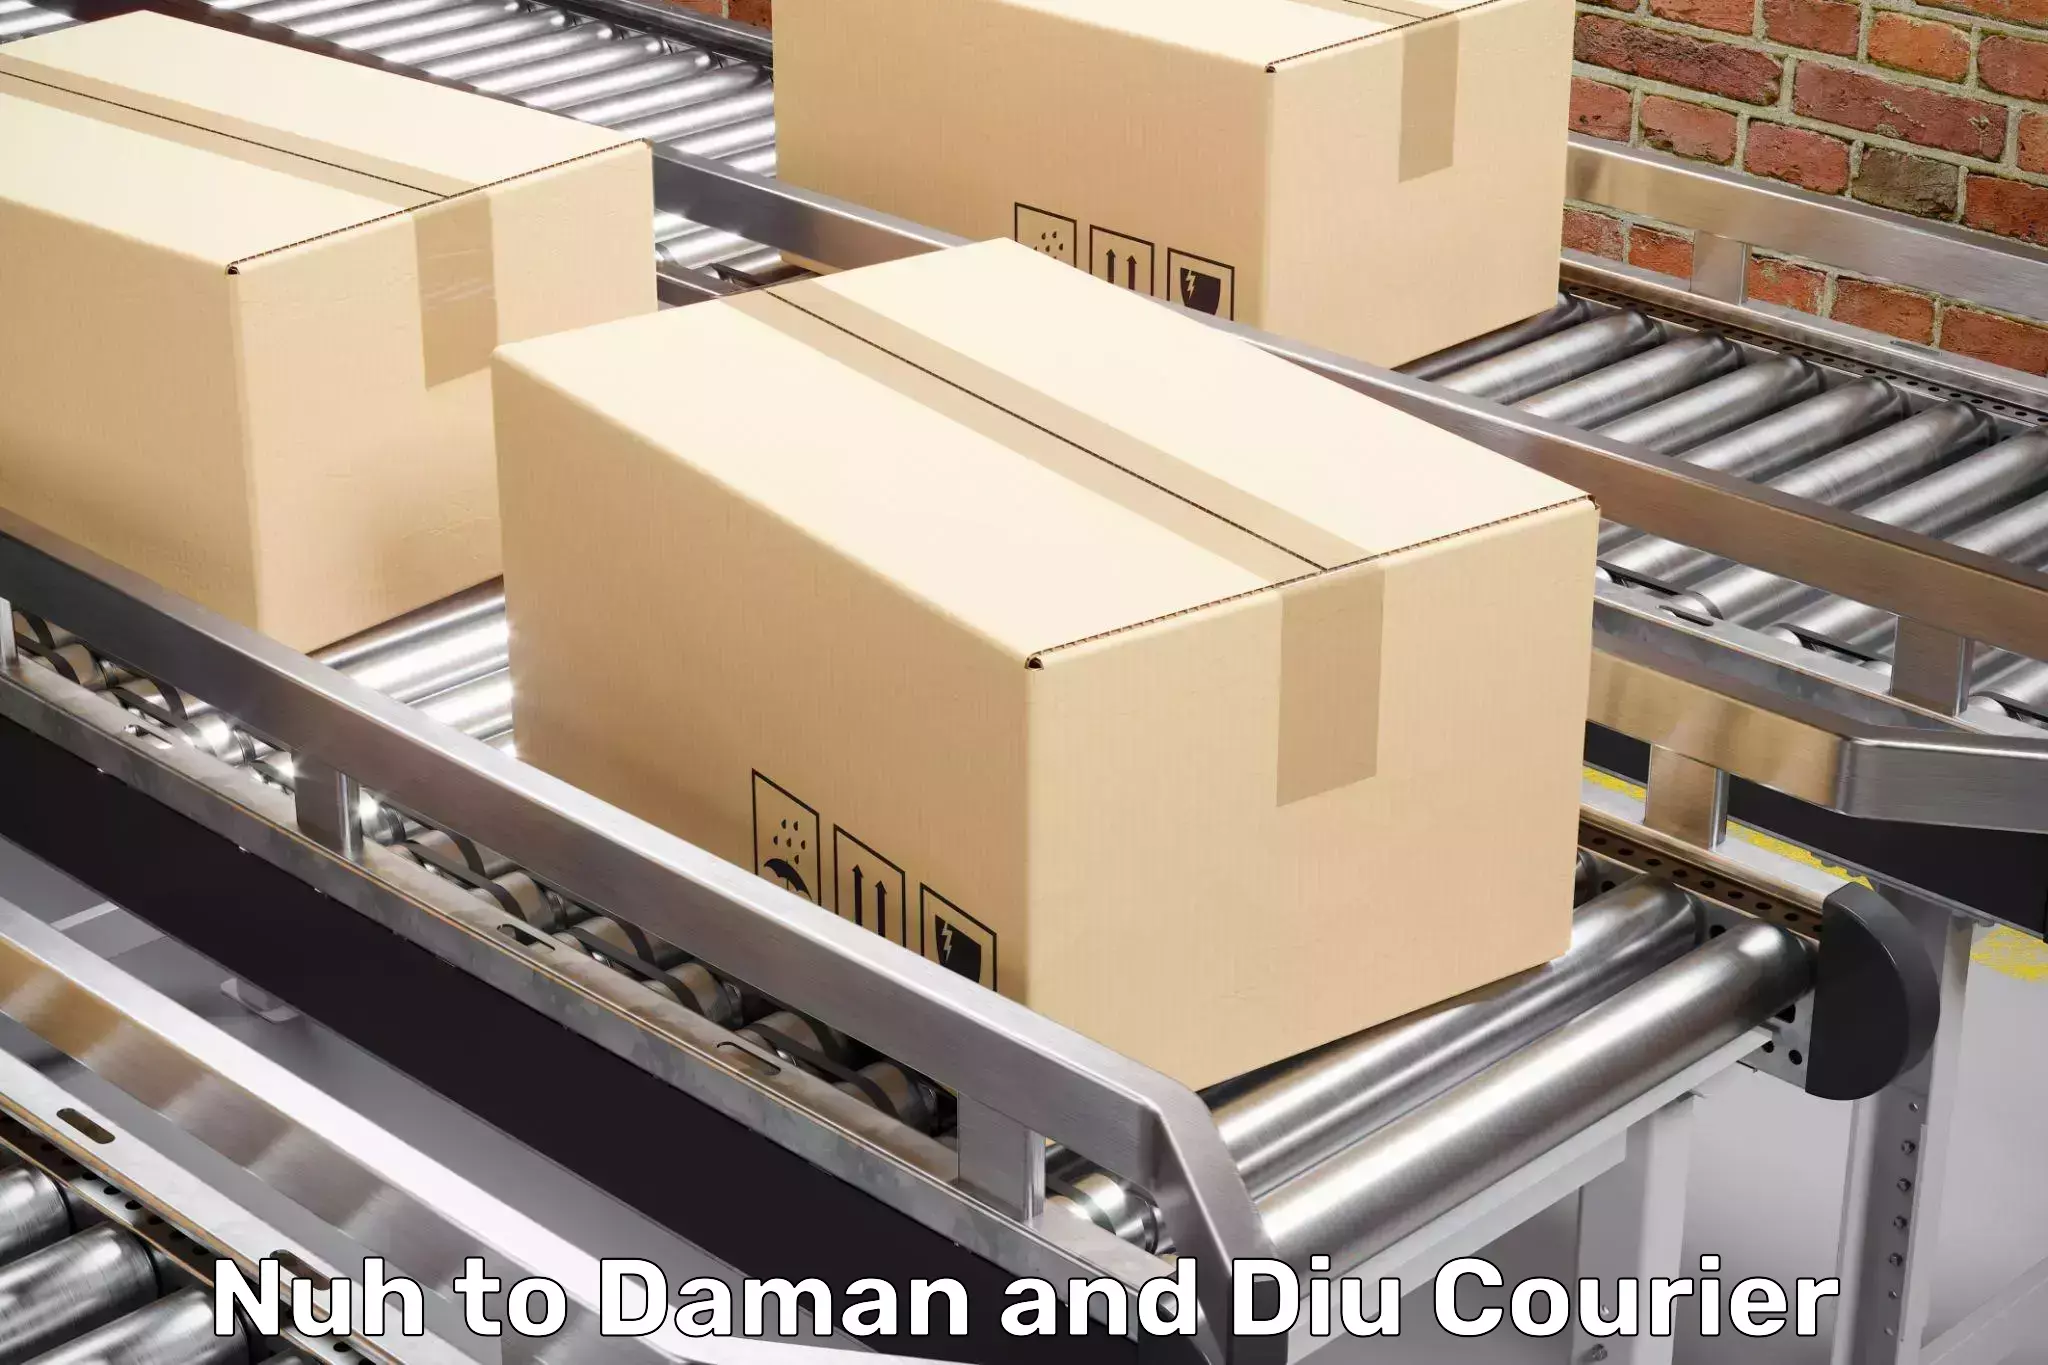 Furniture transport specialists Nuh to Daman